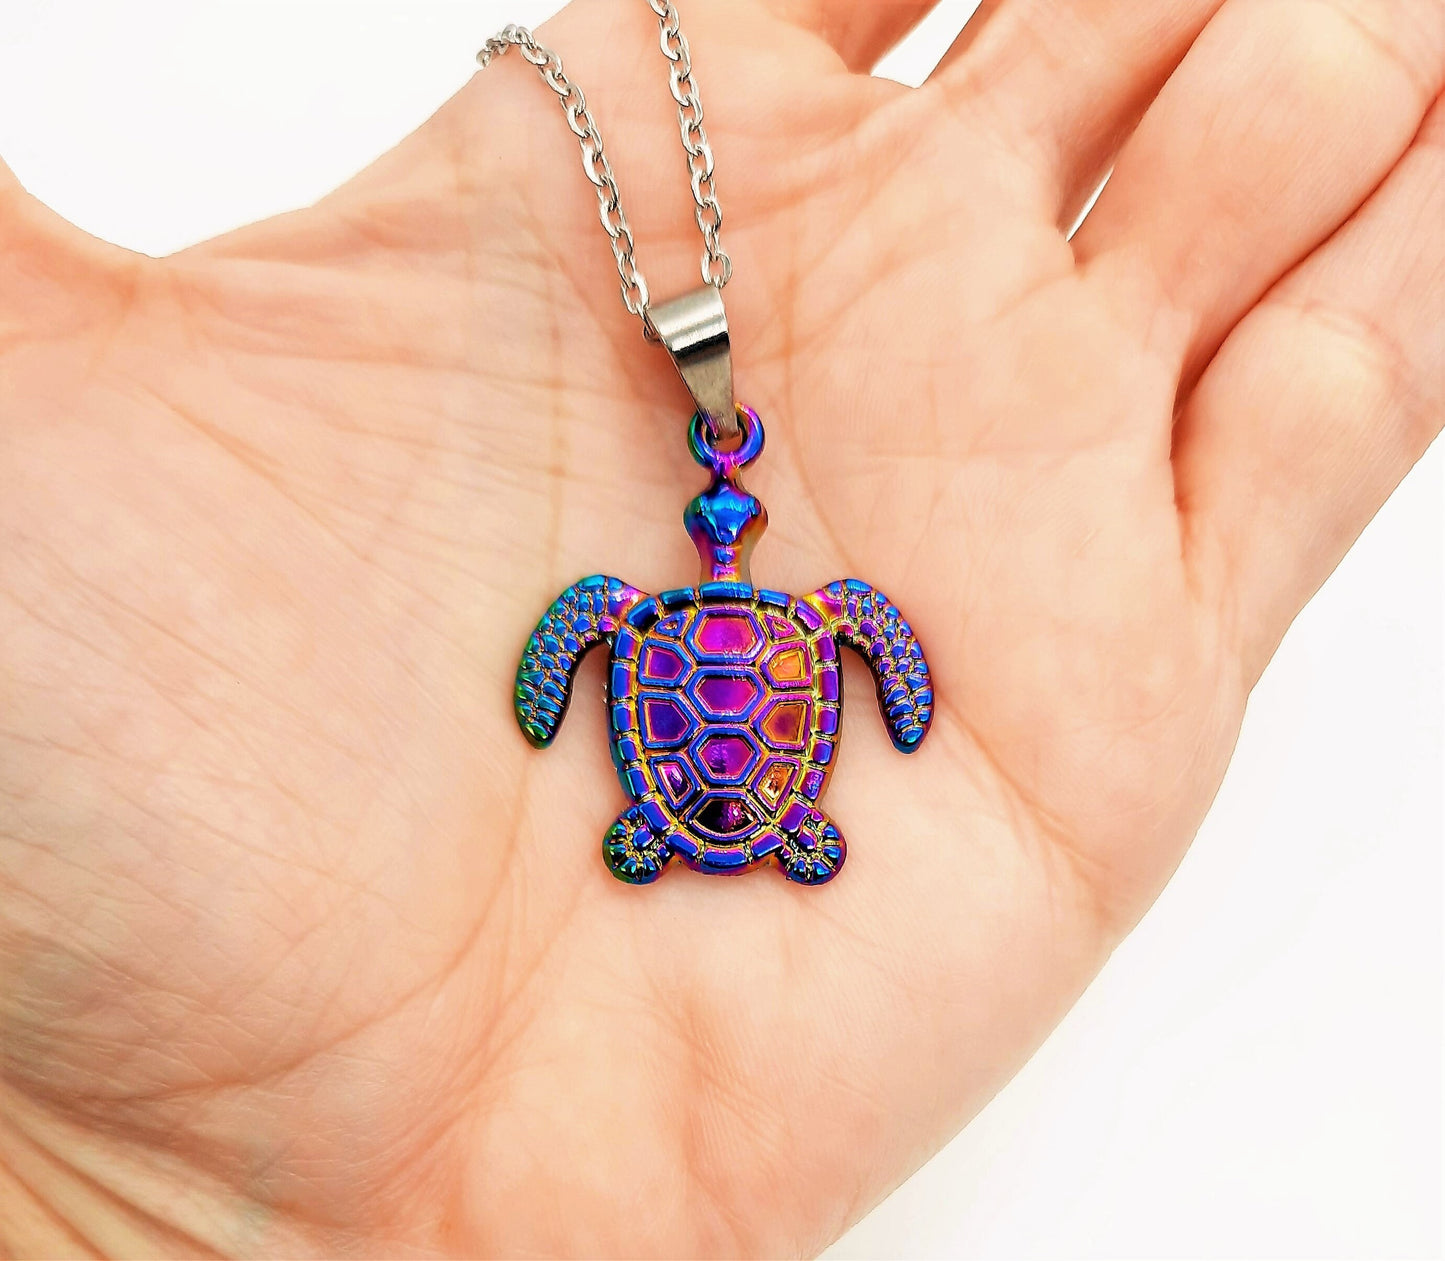 Rainbow Chromium Metal Sea Turtle / Tortoise Necklace - 19" Stainless Steel Hypoallergenic Chain - Lobster Claw Closure - Alloy Pendant